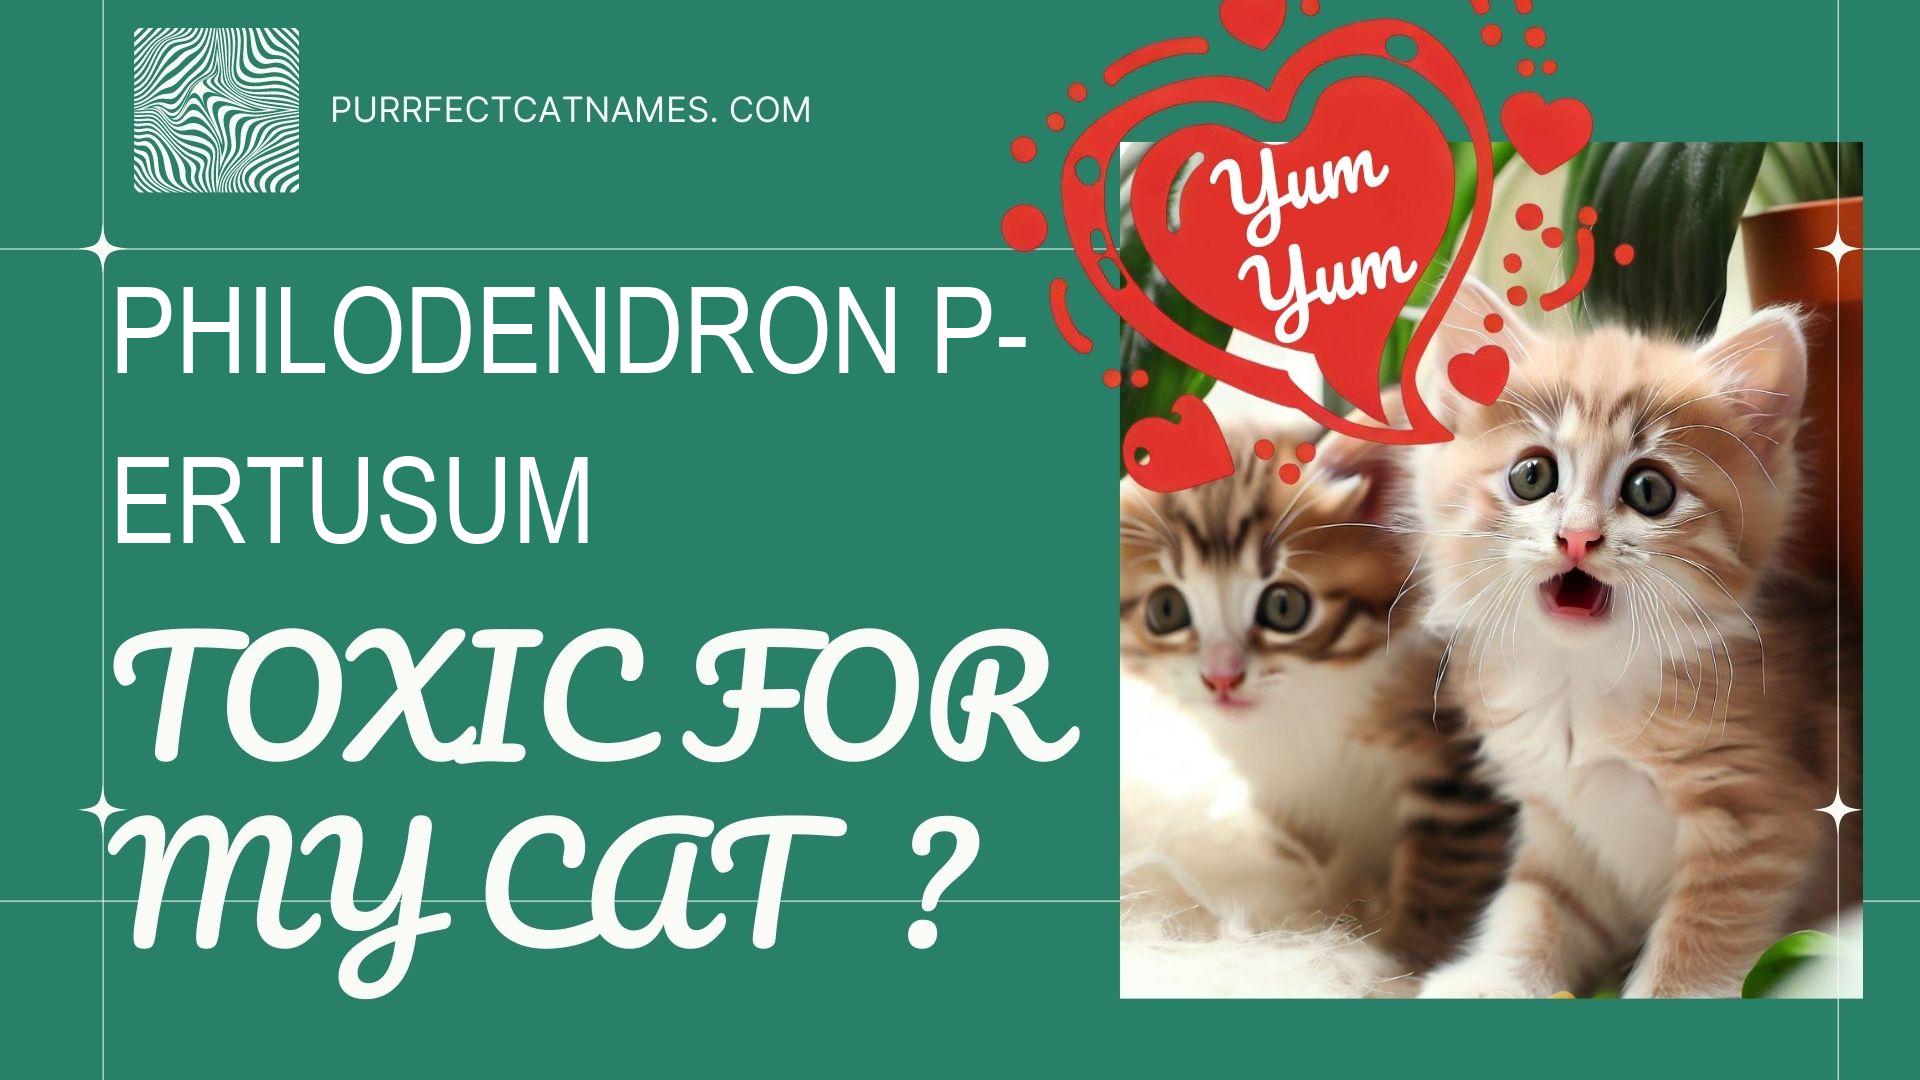 IsPhilodendron Pertusum plant toxic for your cat